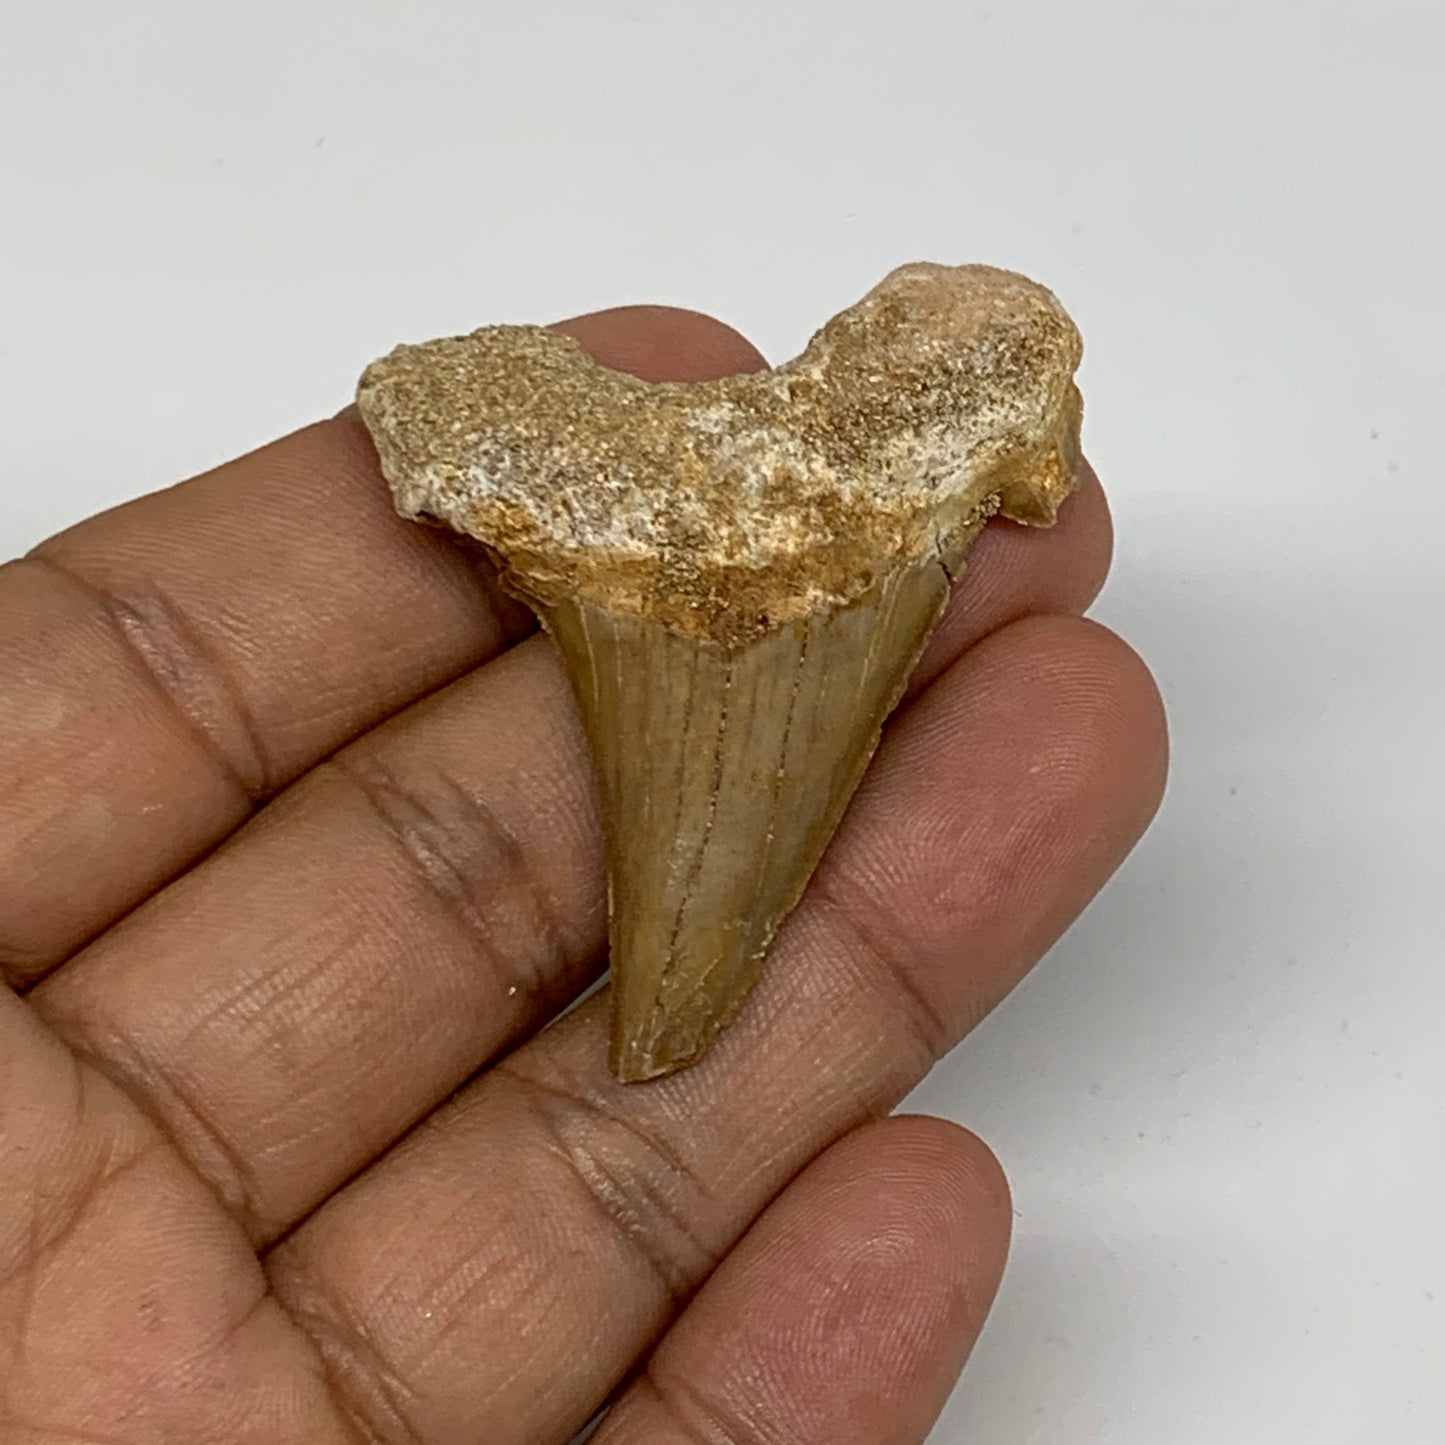 14.4g, 1.8"X 1.6"x 0.4" Natural Fossils Fish Shark Tooth @Morocco, B12647